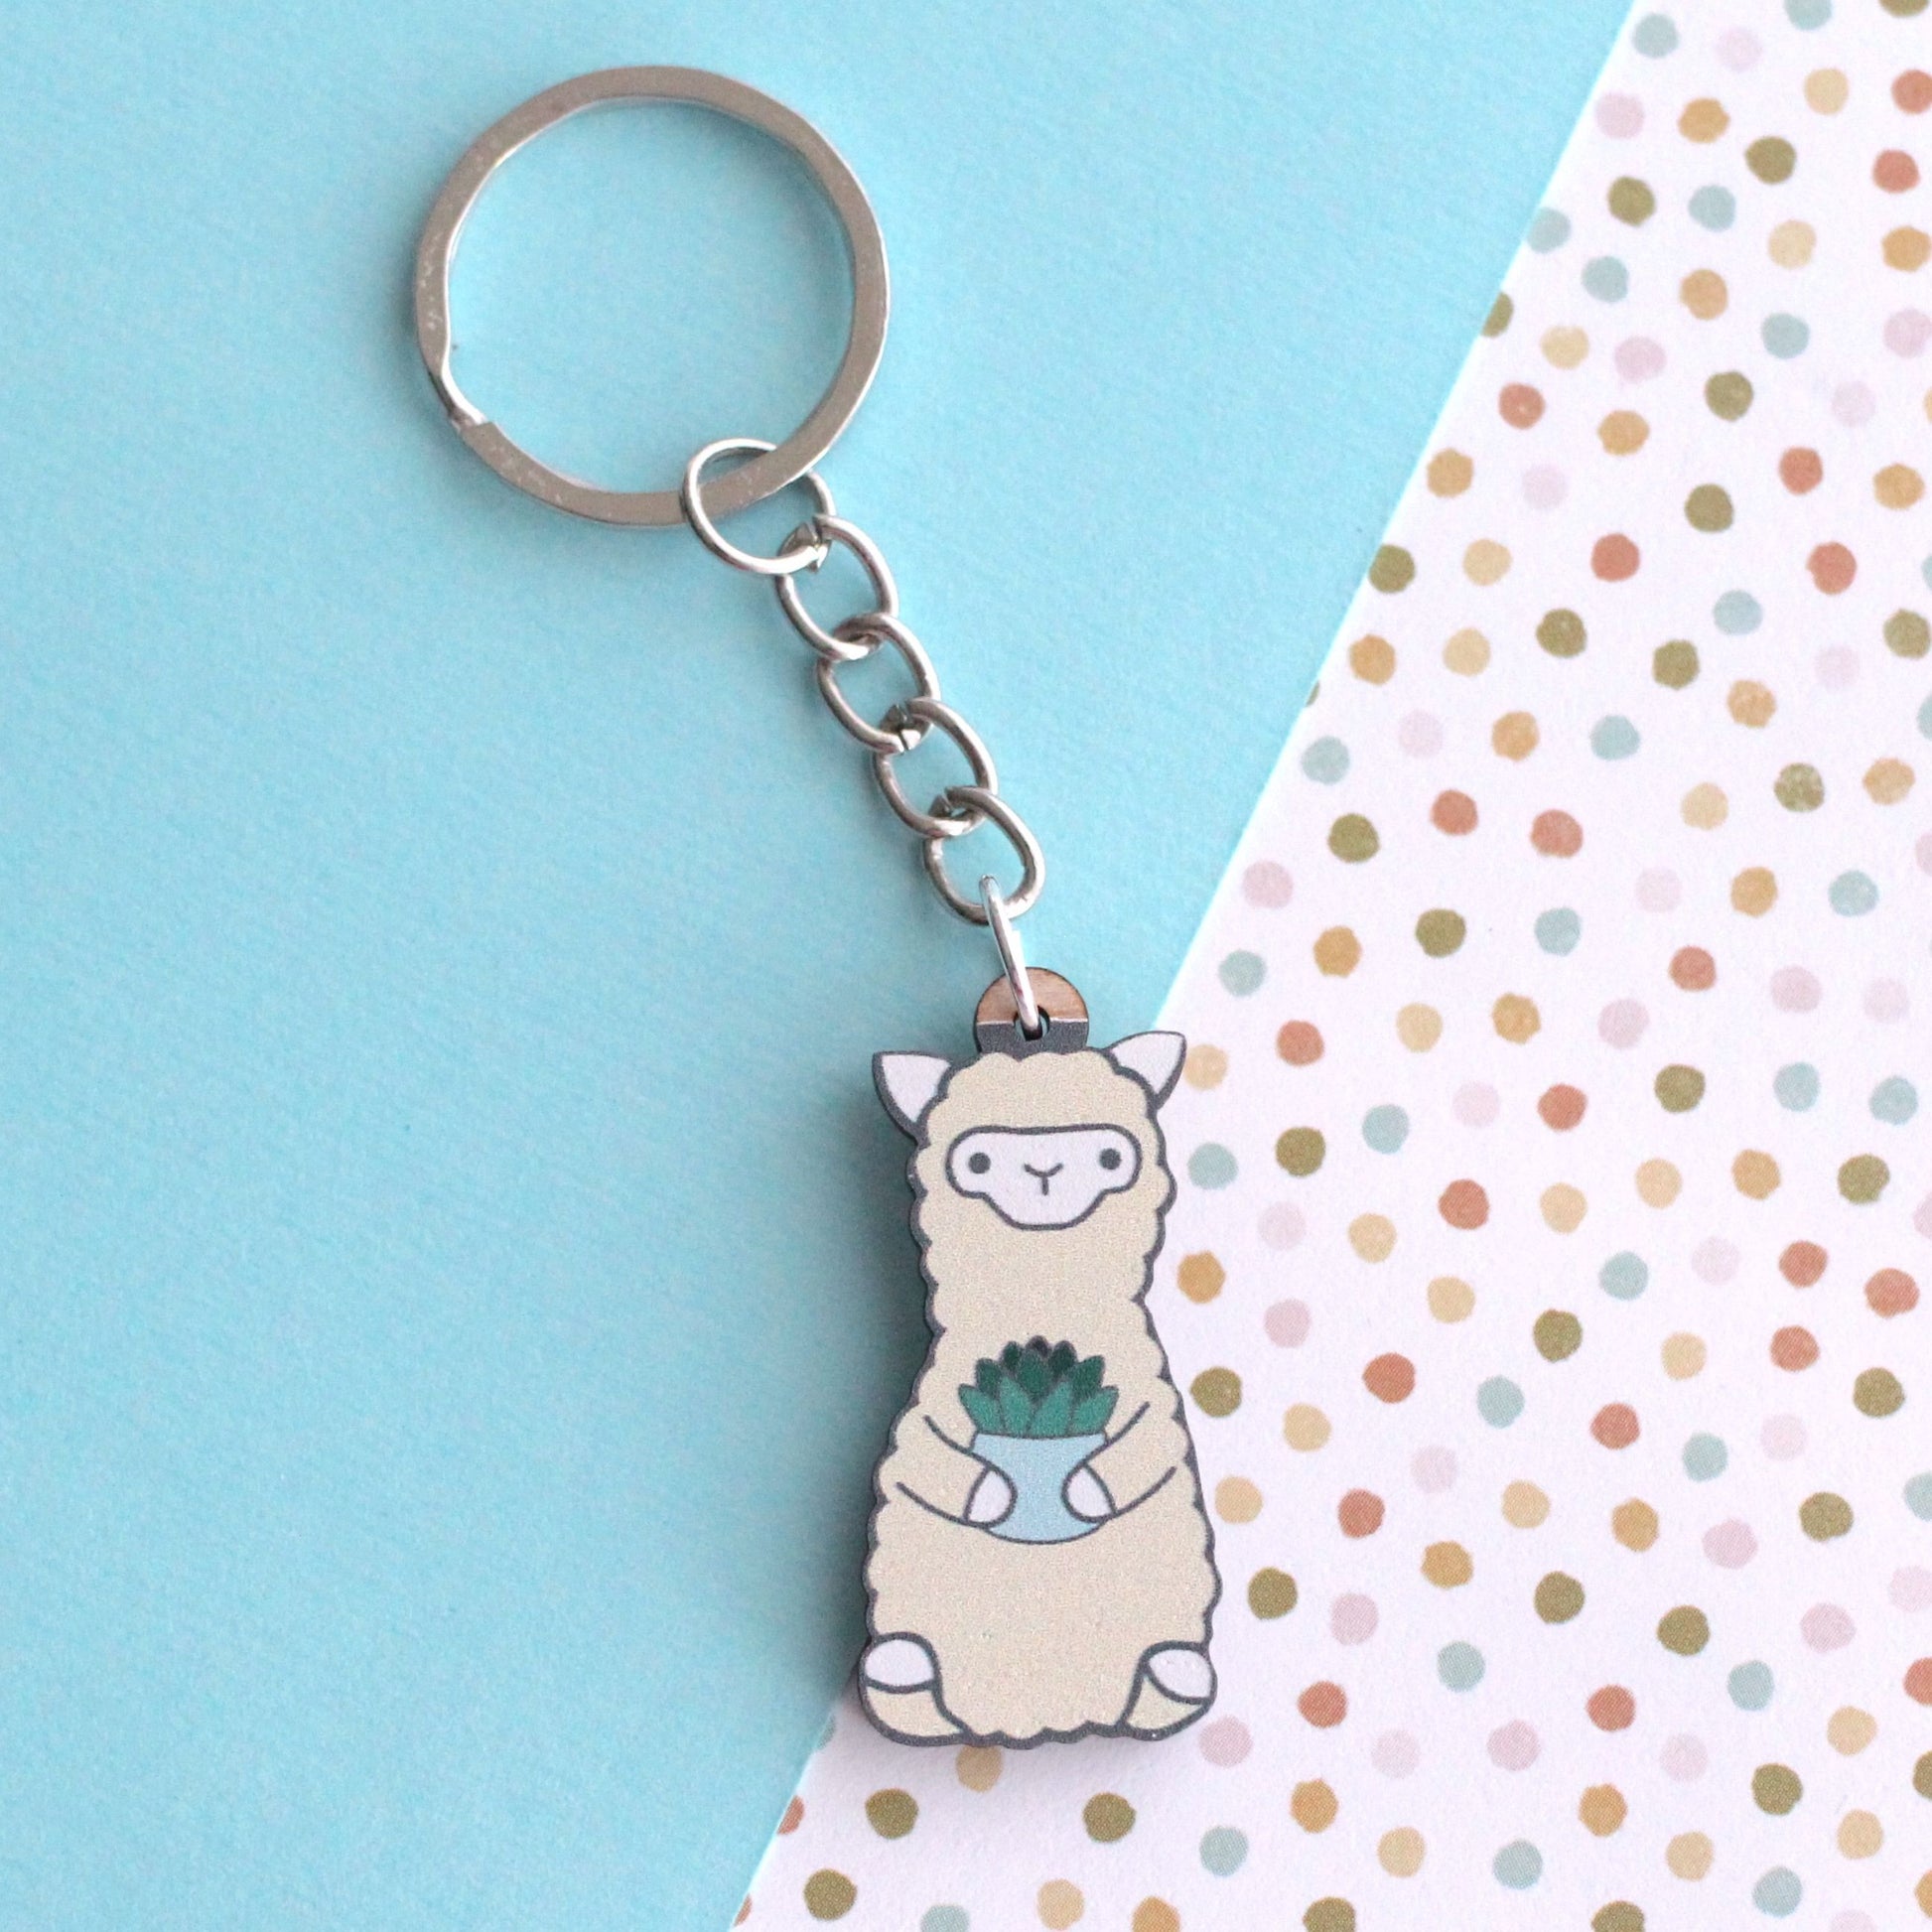 Alpaca Holding Succulent Wooden Keychain - Sustainable Gift - Llama Gift by Wild Whimsy Woolies